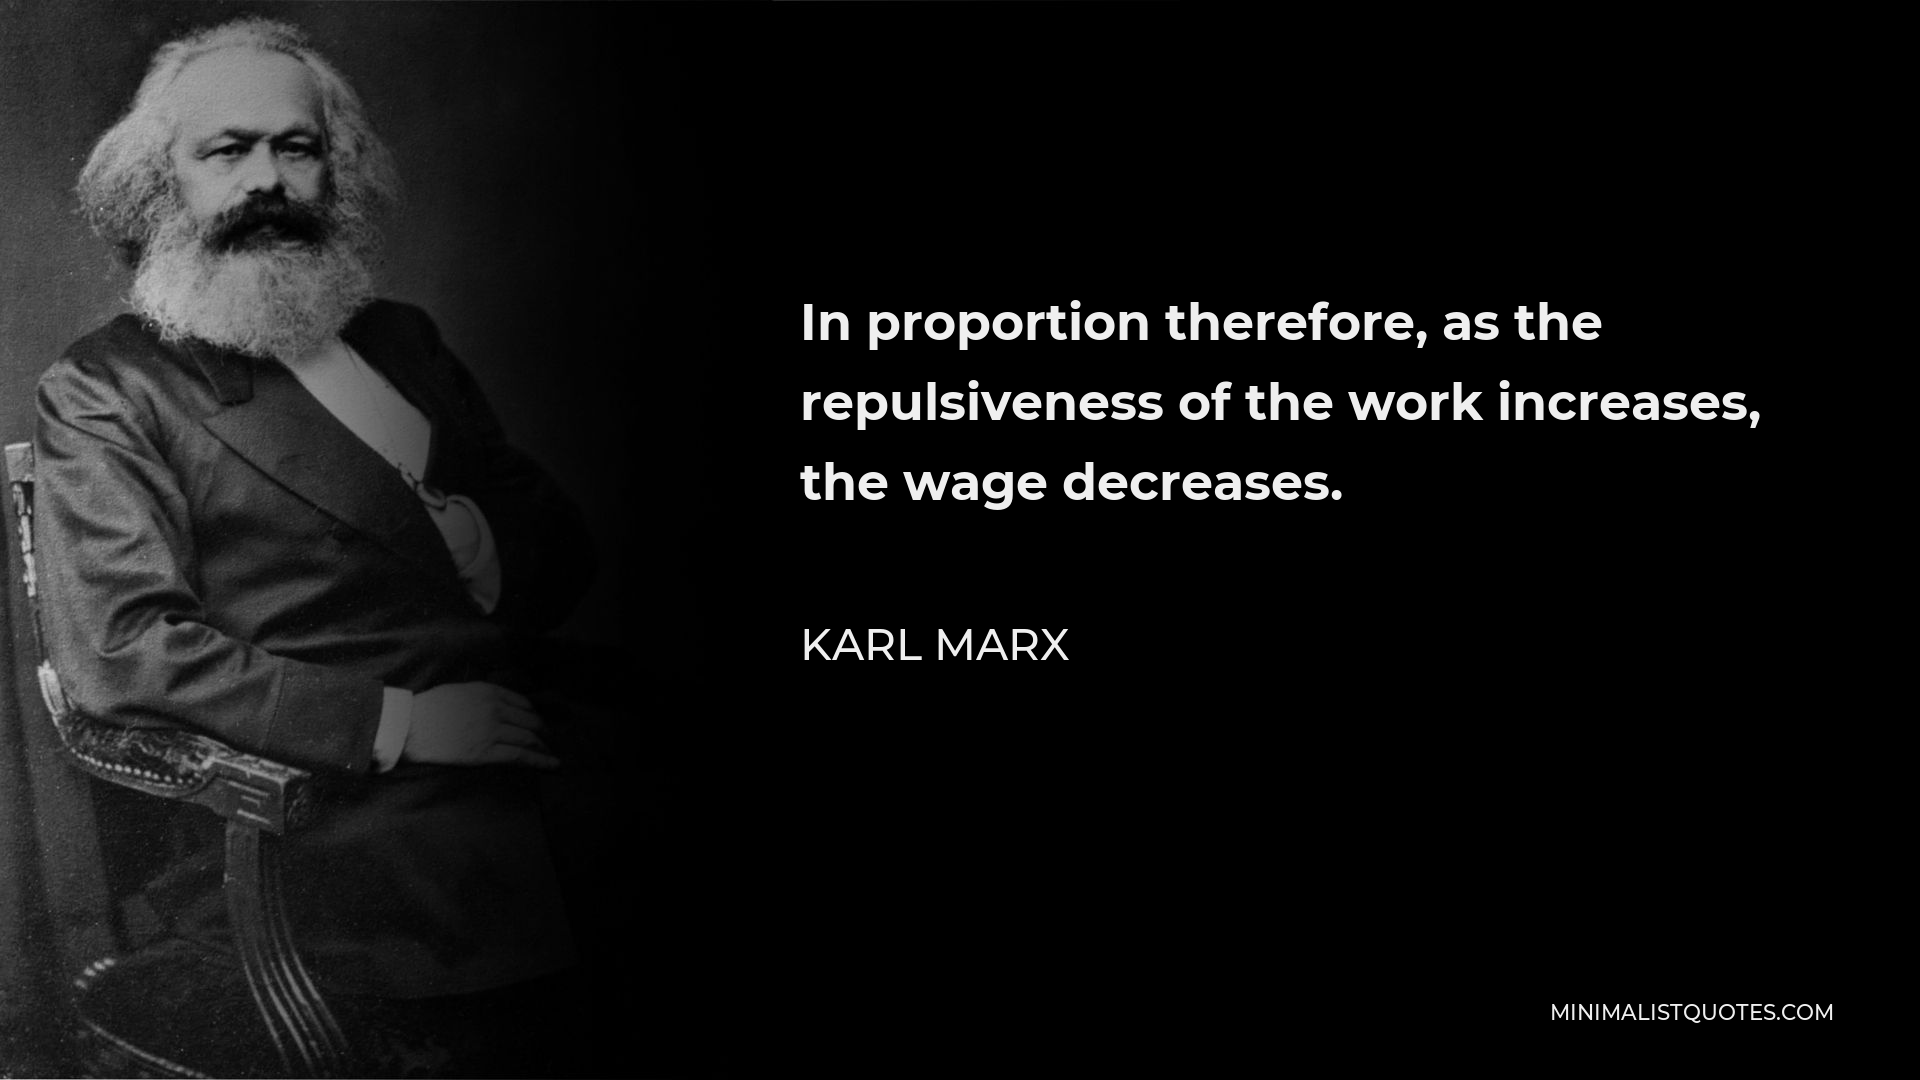 Karl Marx Quote - In proportion therefore, as the repulsiveness of the work increases, the wage decreases.